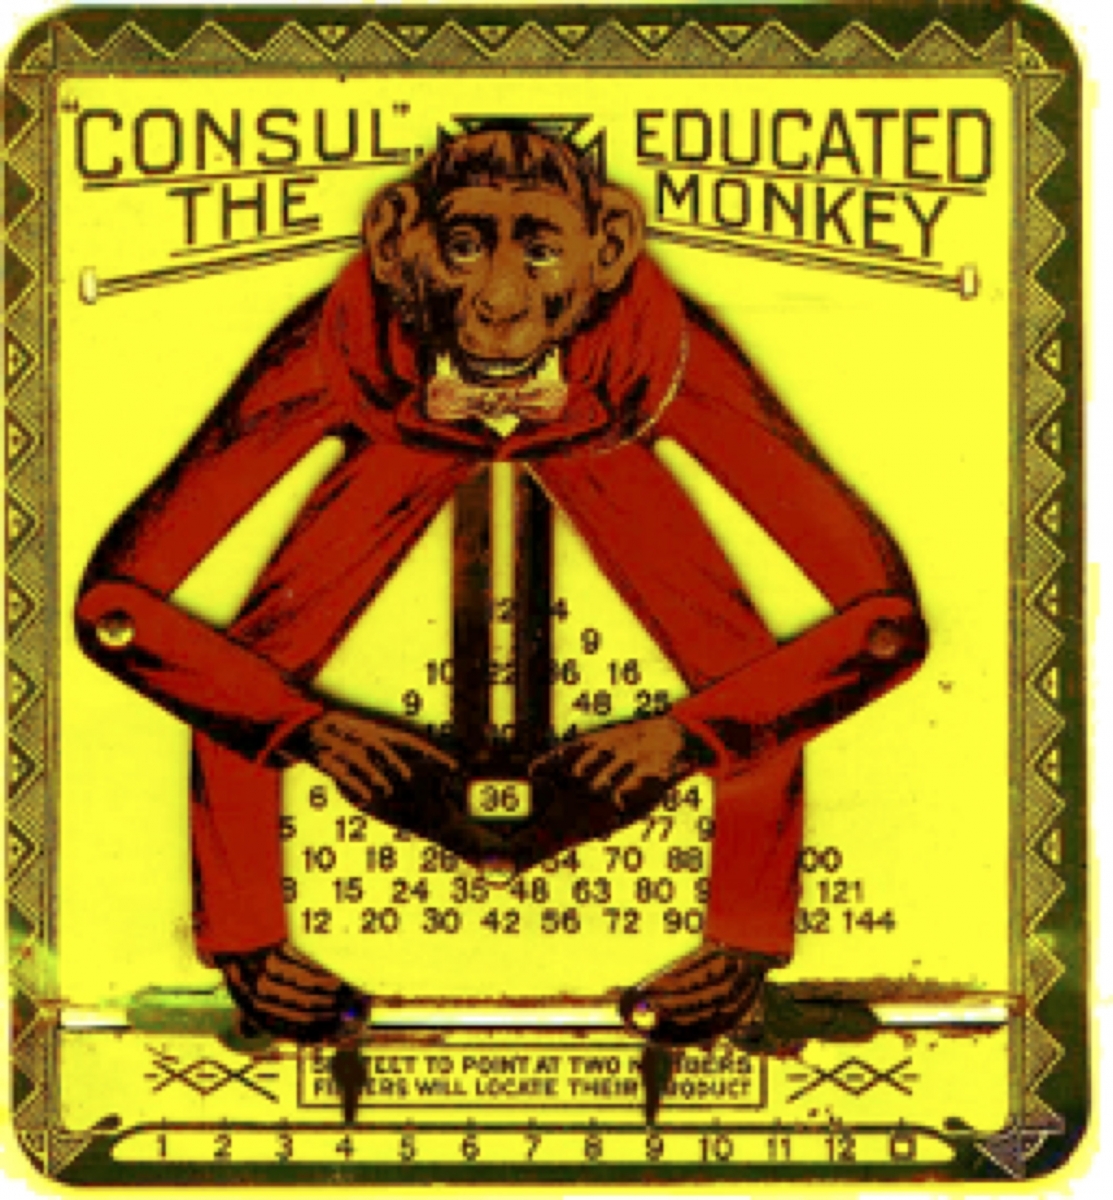 Consul, the Educated Monkey, an early 20th-century mathematical toy.